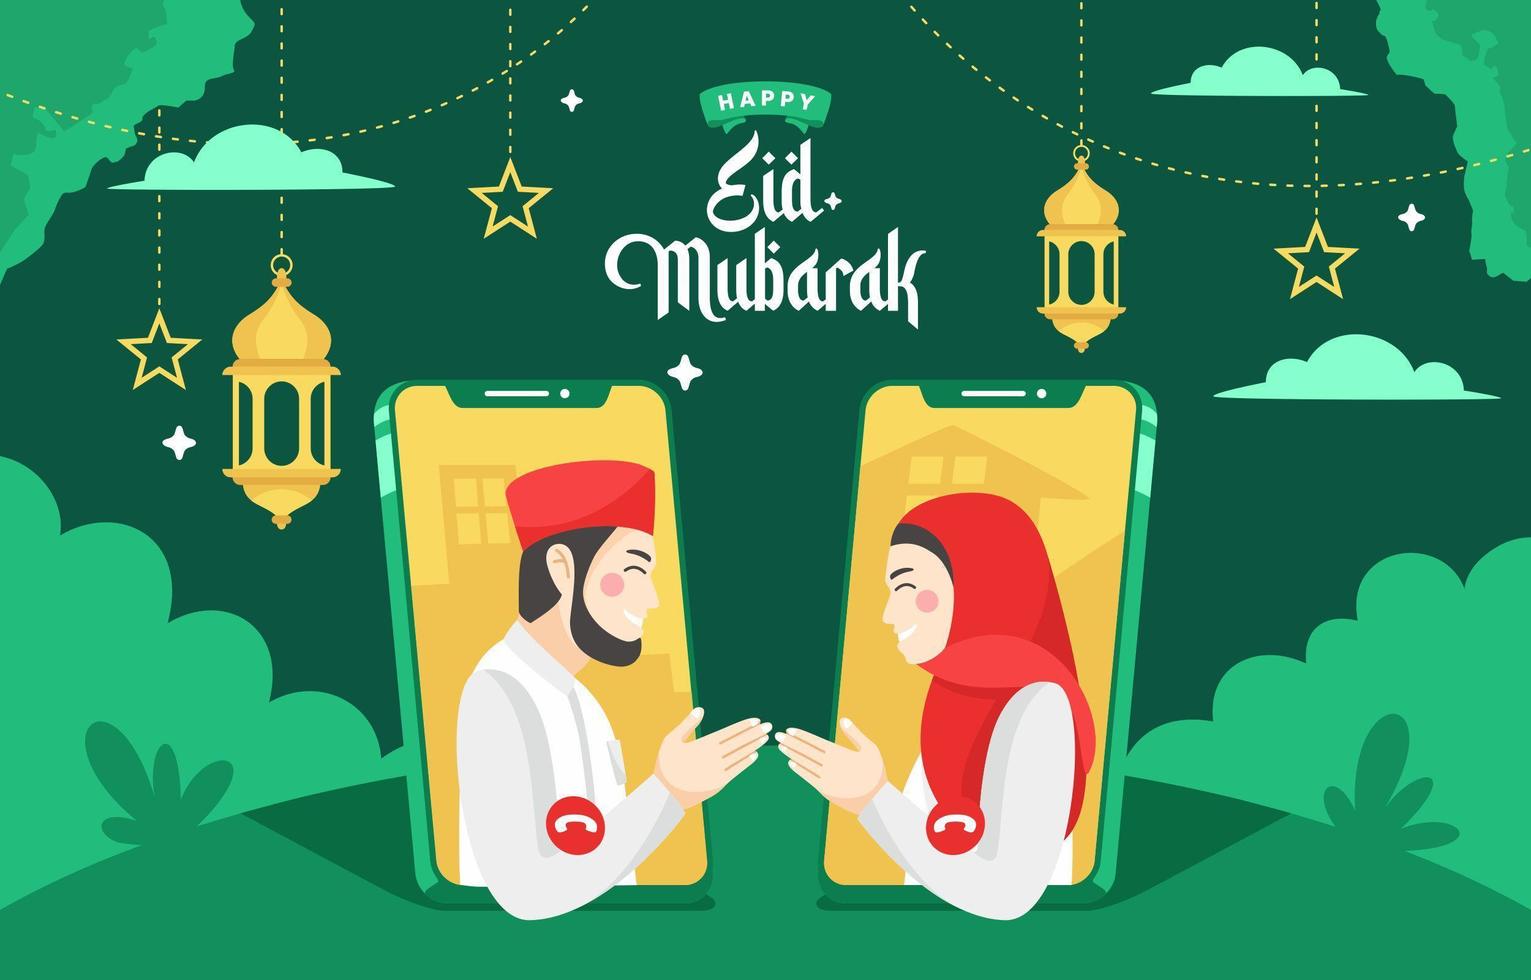 People Give Eid Greetings by Video Call vector